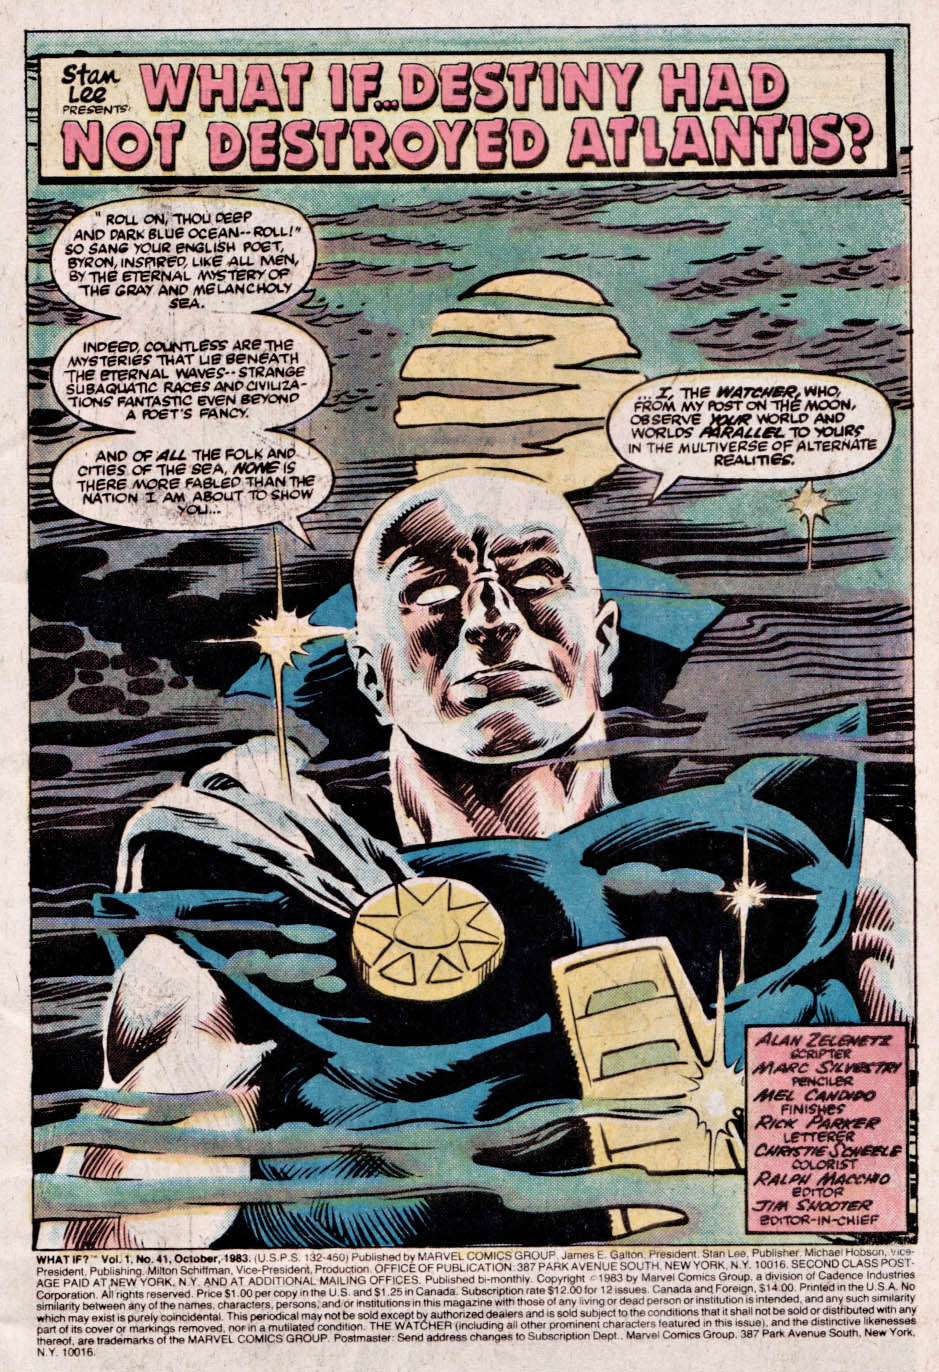 What If? (1977) issue 41 - The Sub-mariner had saved Atlantis from its destiny - Page 2